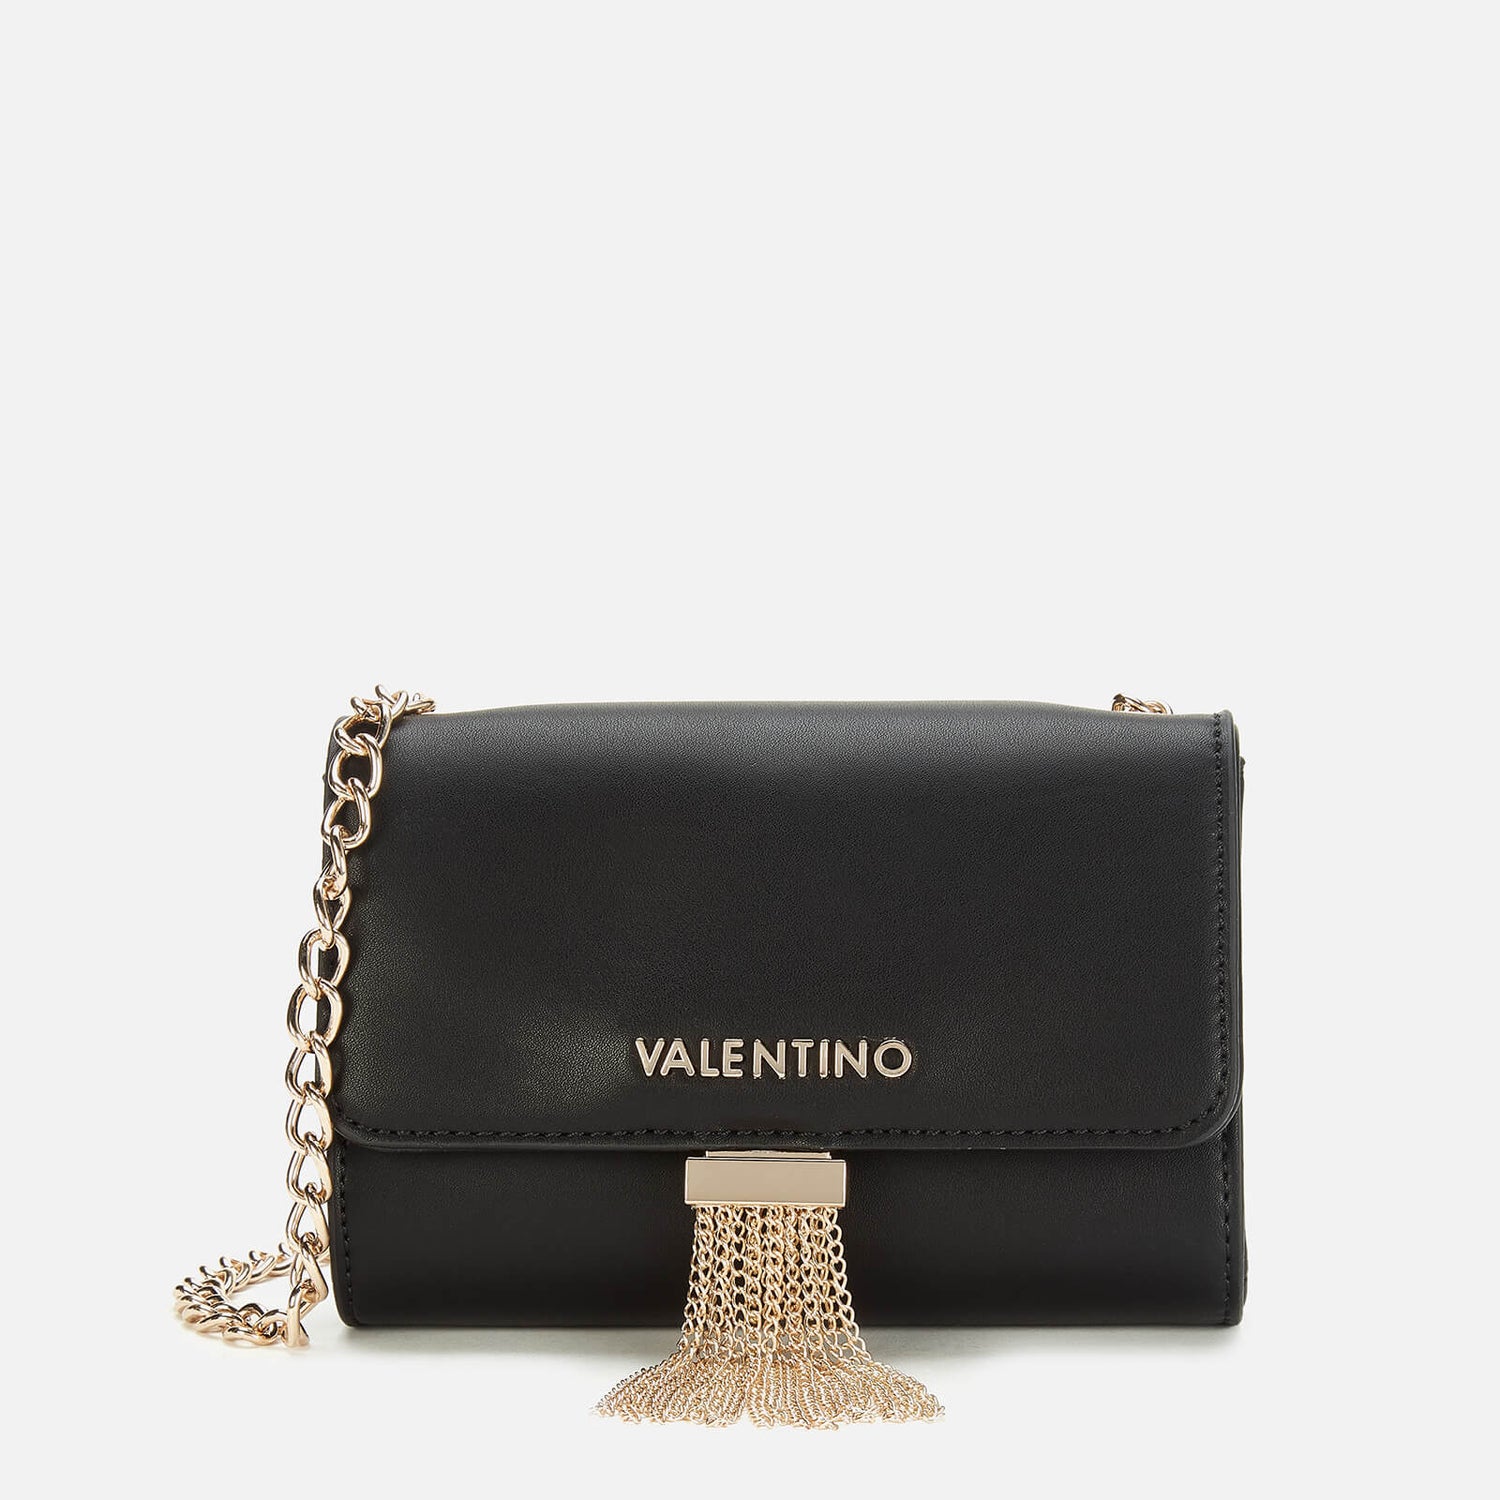 Valentino Bags Women's Piccadilly Small Shoulder Bag - Black